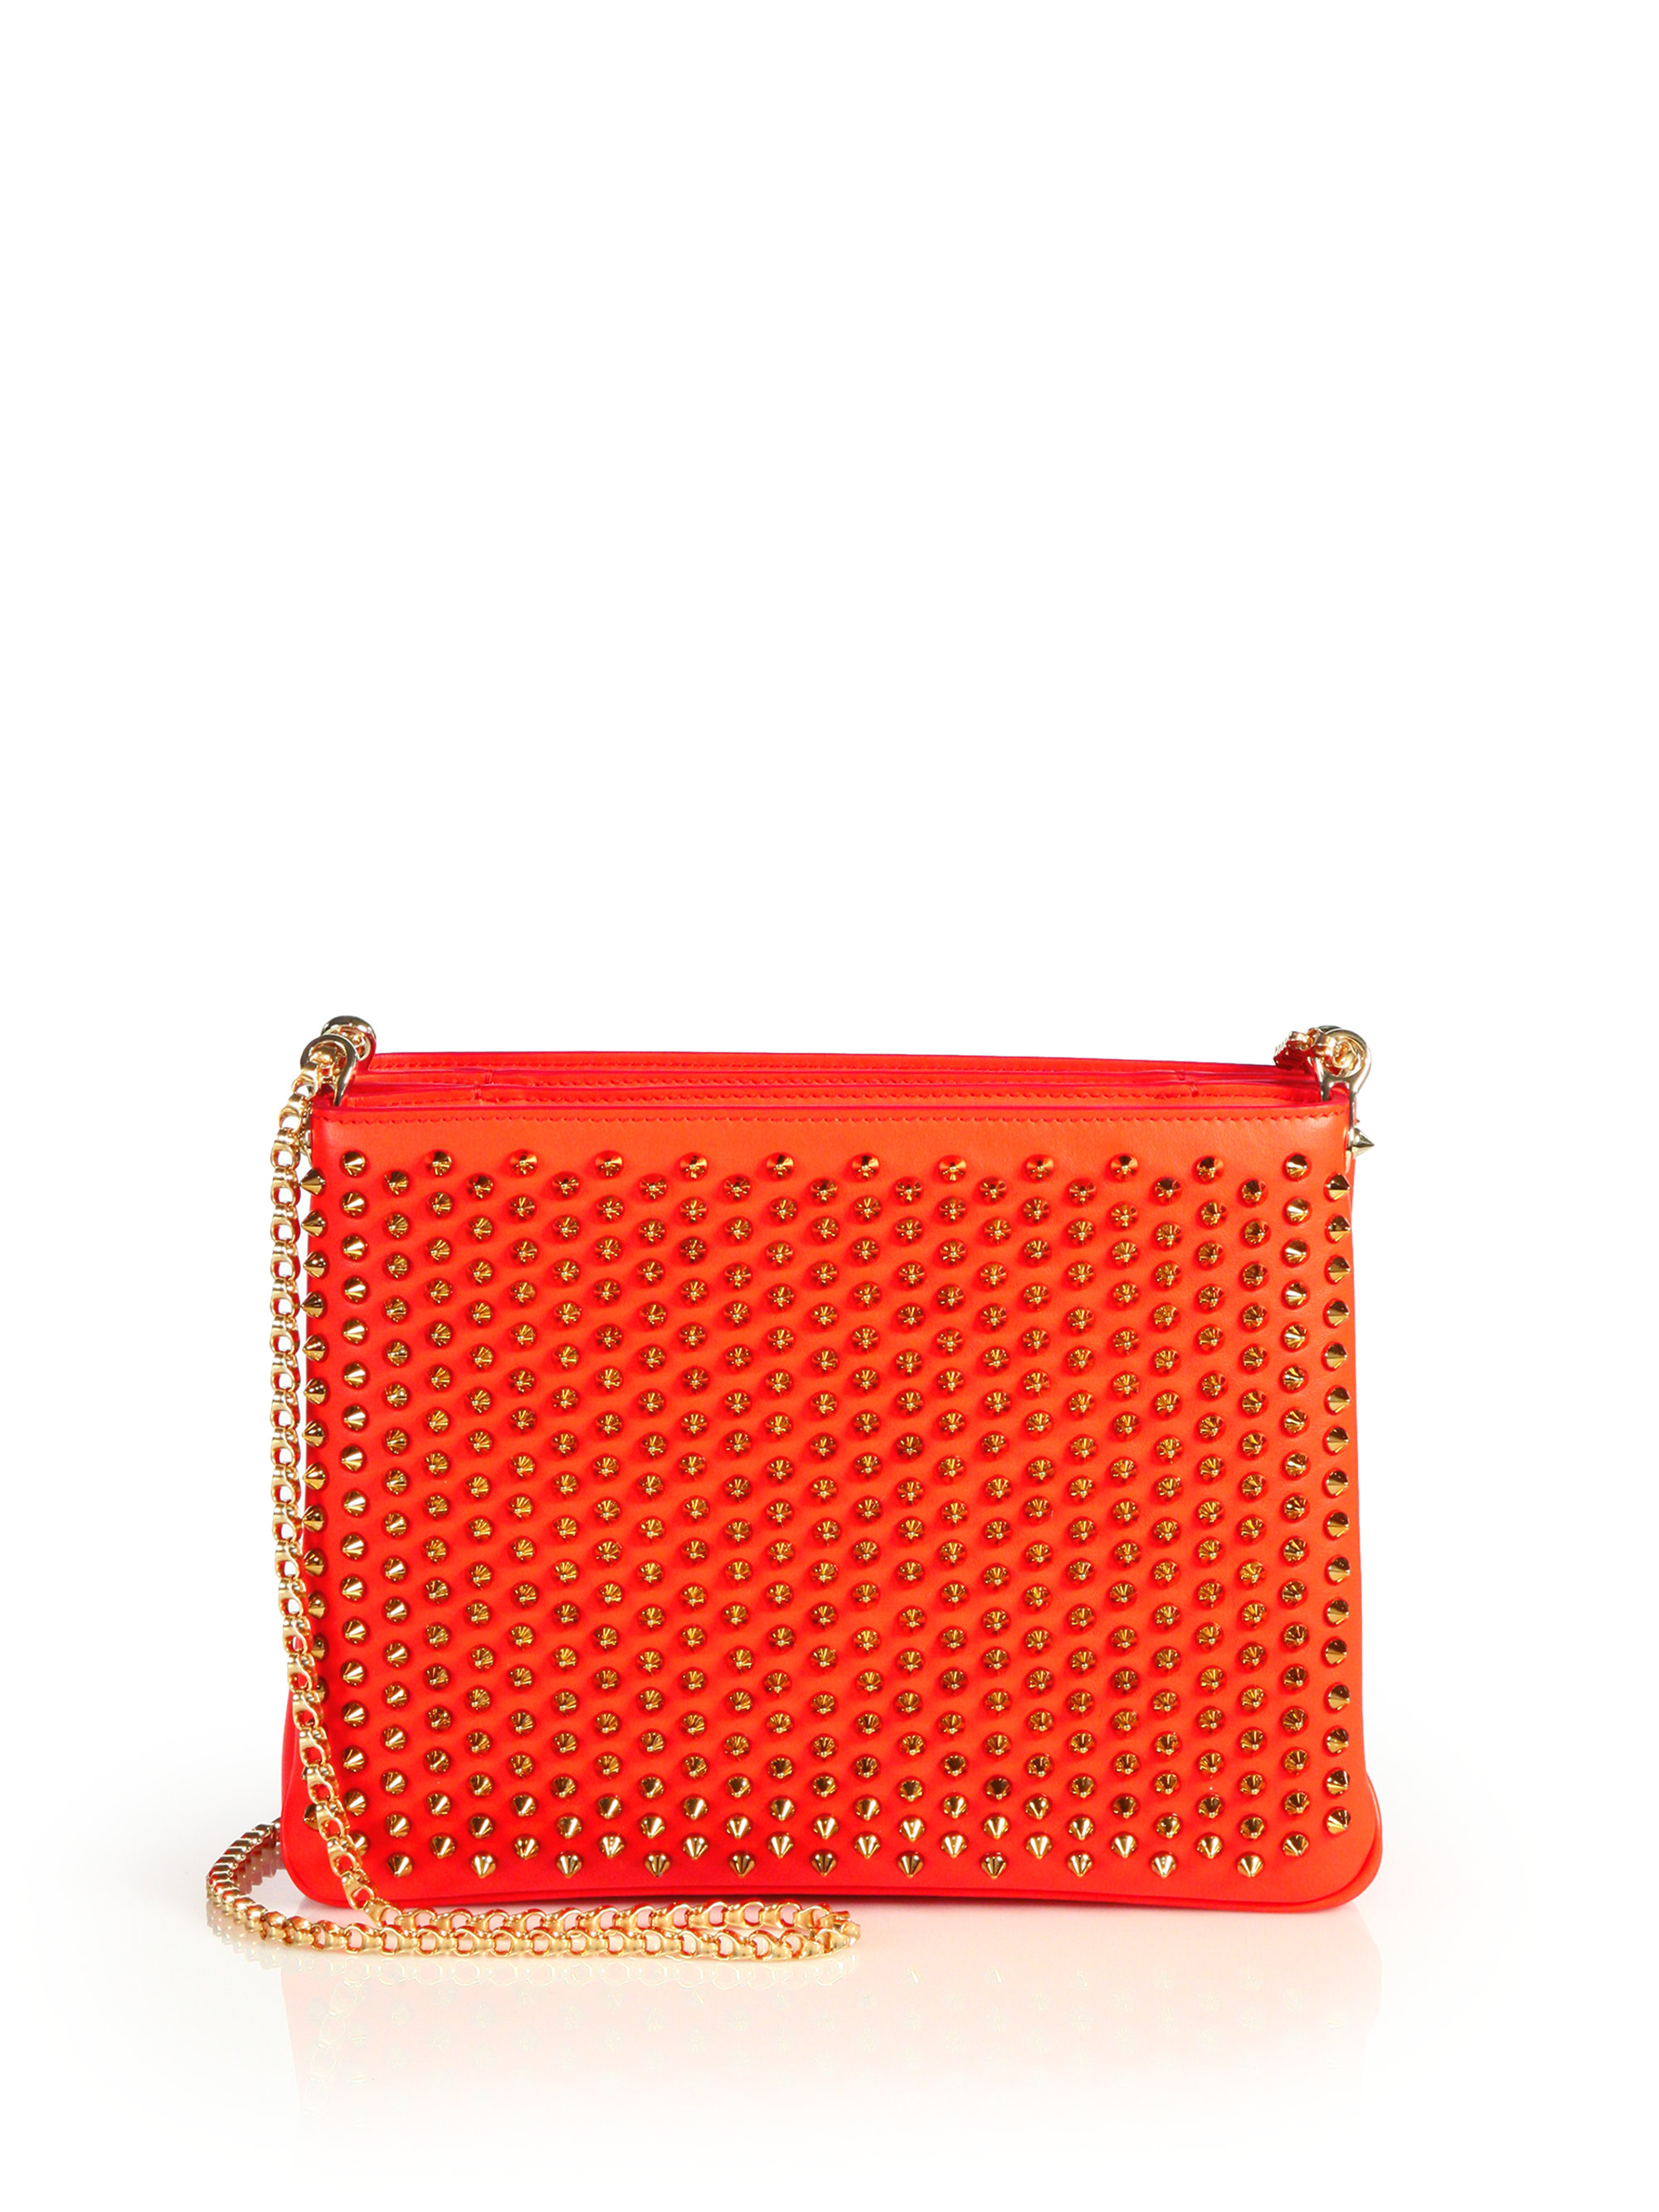 Christian louboutin Tribouli Spiked Crossbody Bag in Red (capucine) | Lyst